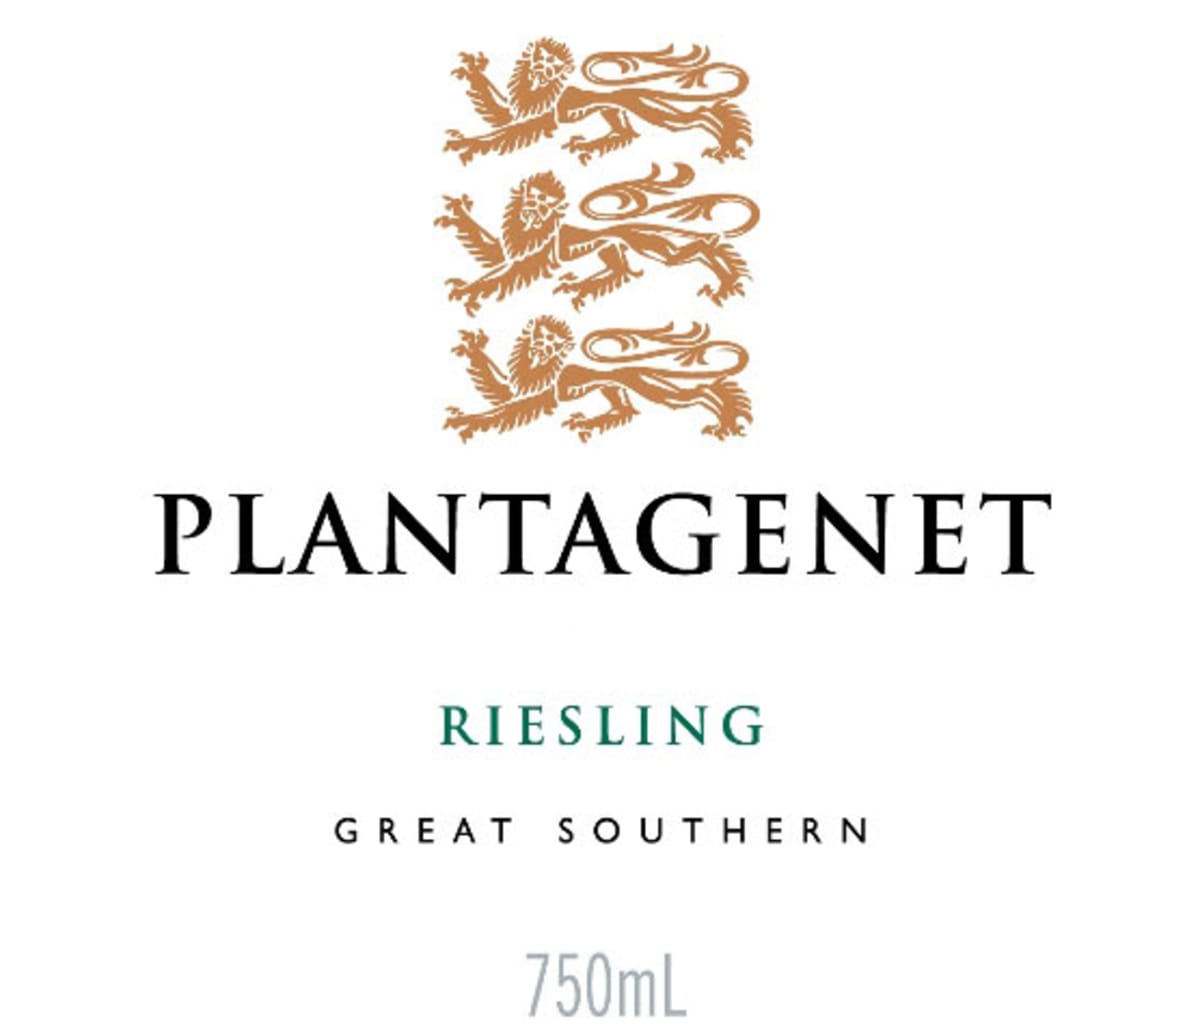 Plantagenet Great Southern Riesling 2008 Front Label